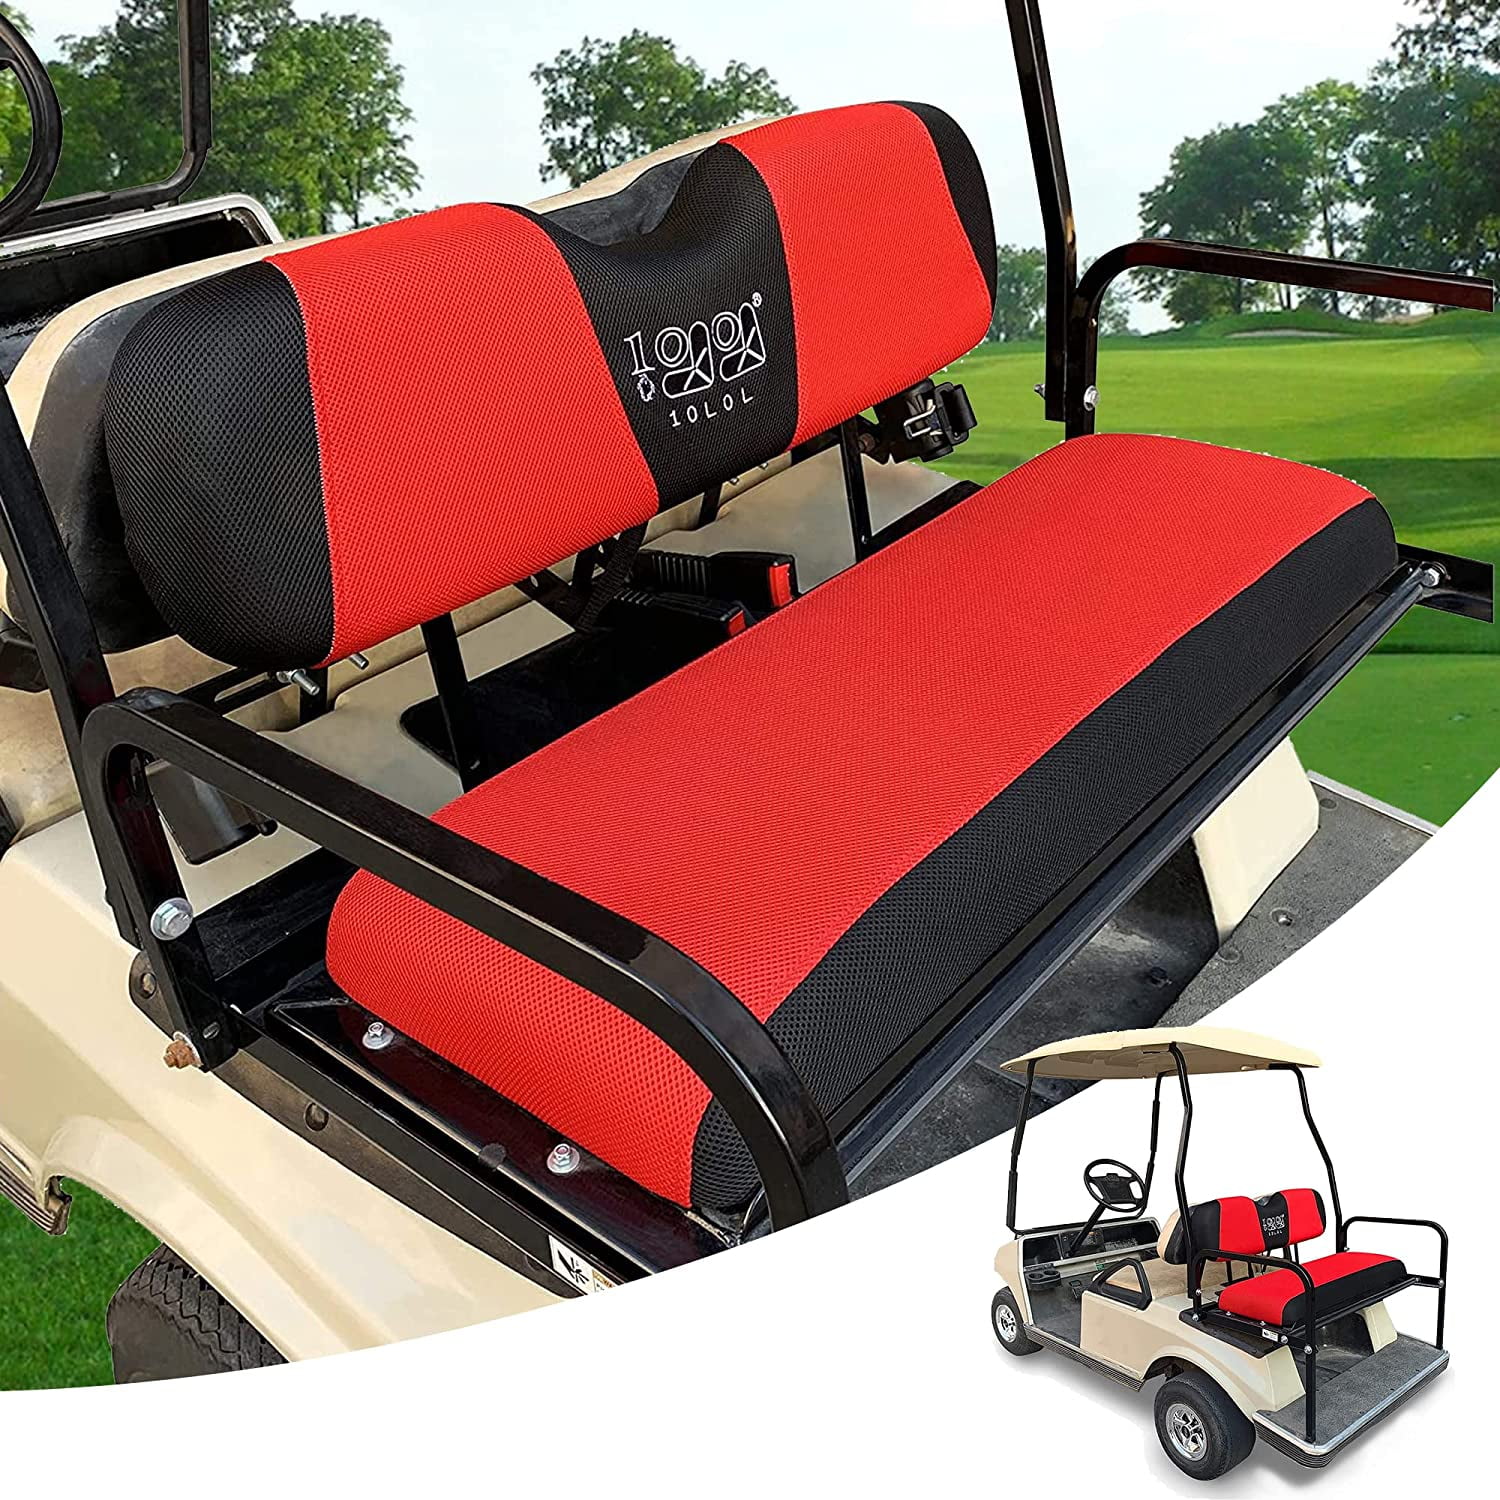  10L0L Universal Golf Cart Seat Covers Dress UP Older Golf Cart  Durable Breathable Material Fit Like a Glove for EZGO TXT RXV Club Car DS,  Easy to Install : Sports